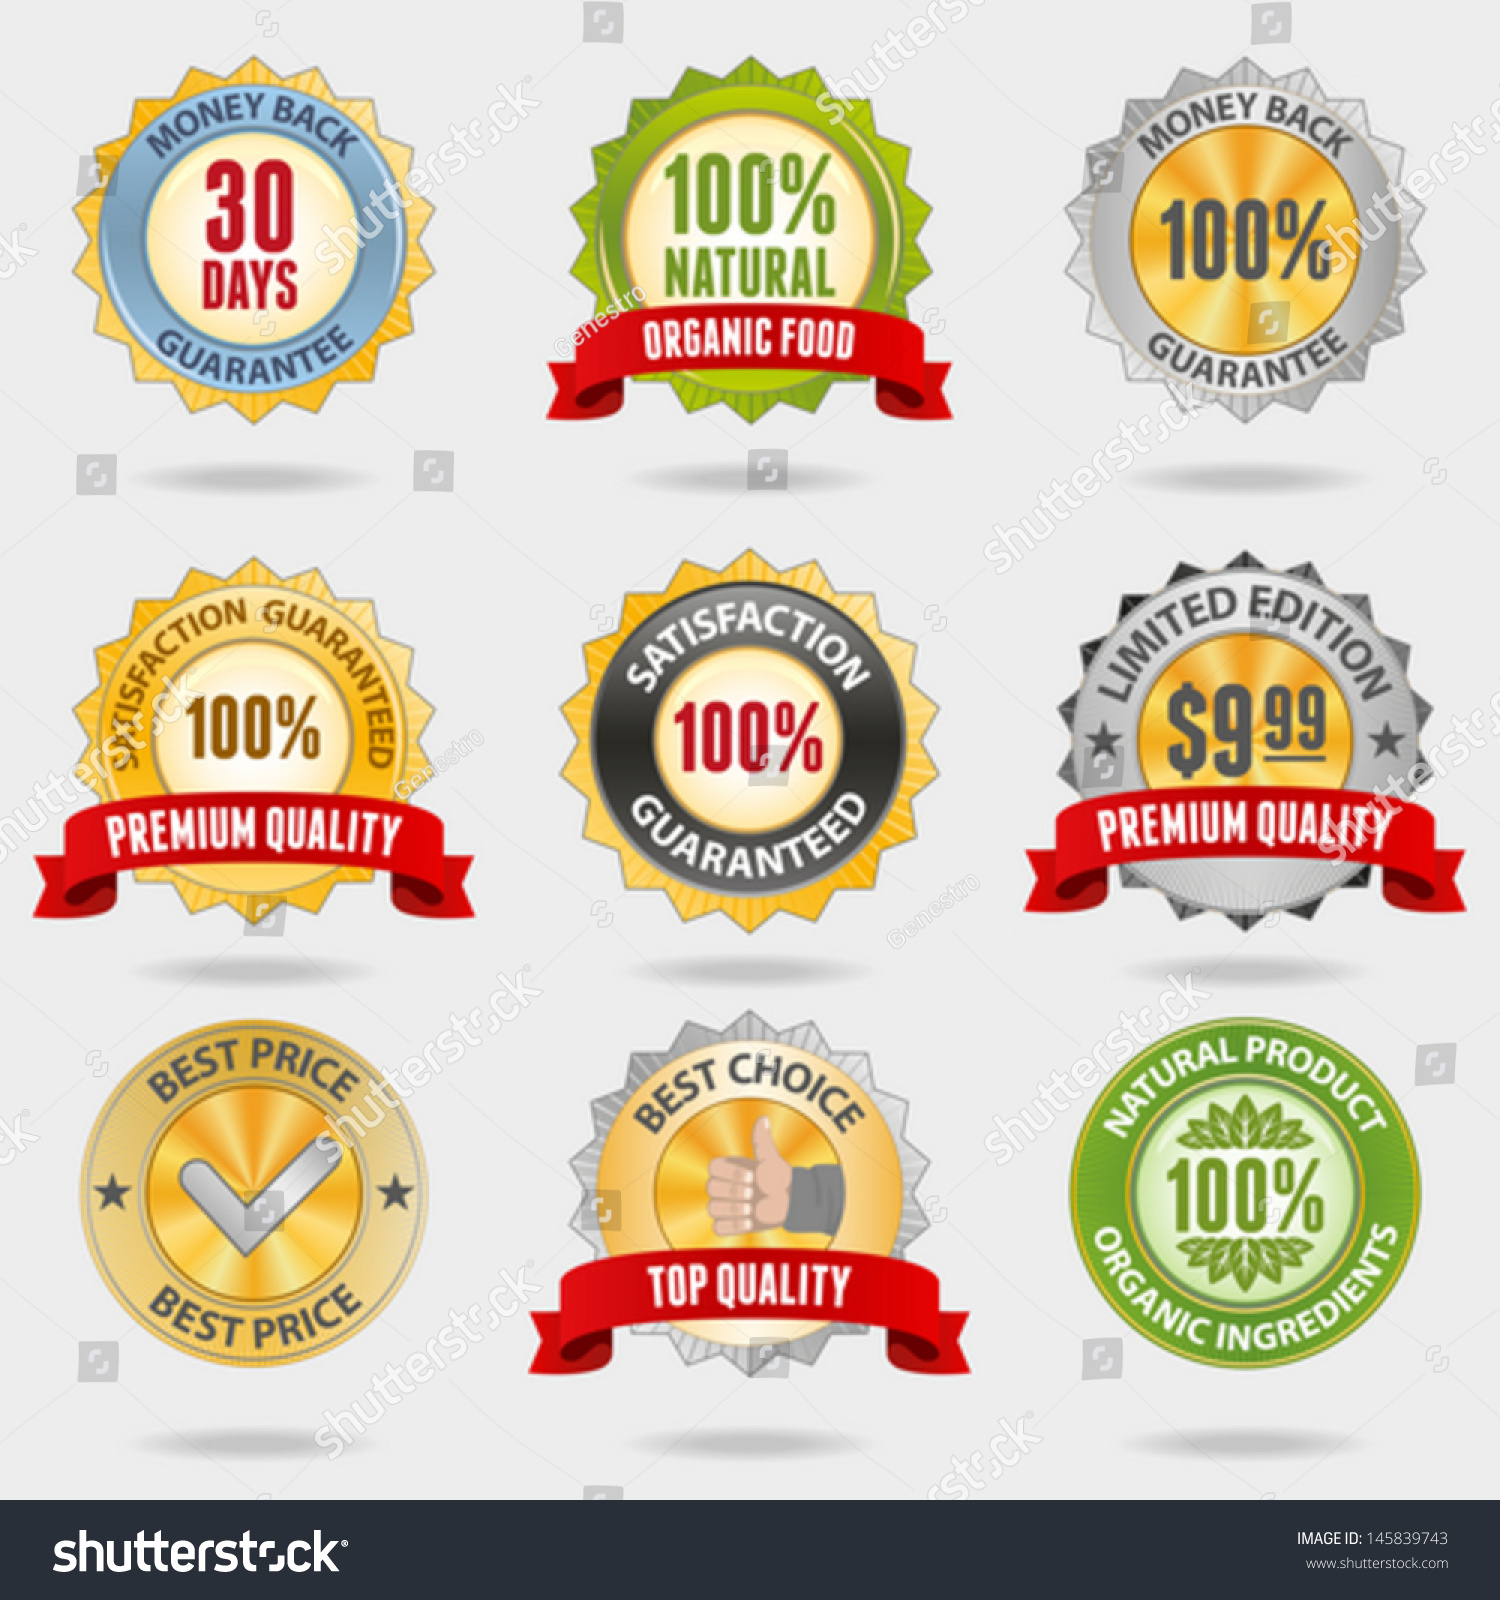 Set Of Different Shiny Badges Stock Vector Illustration 145839743 ...